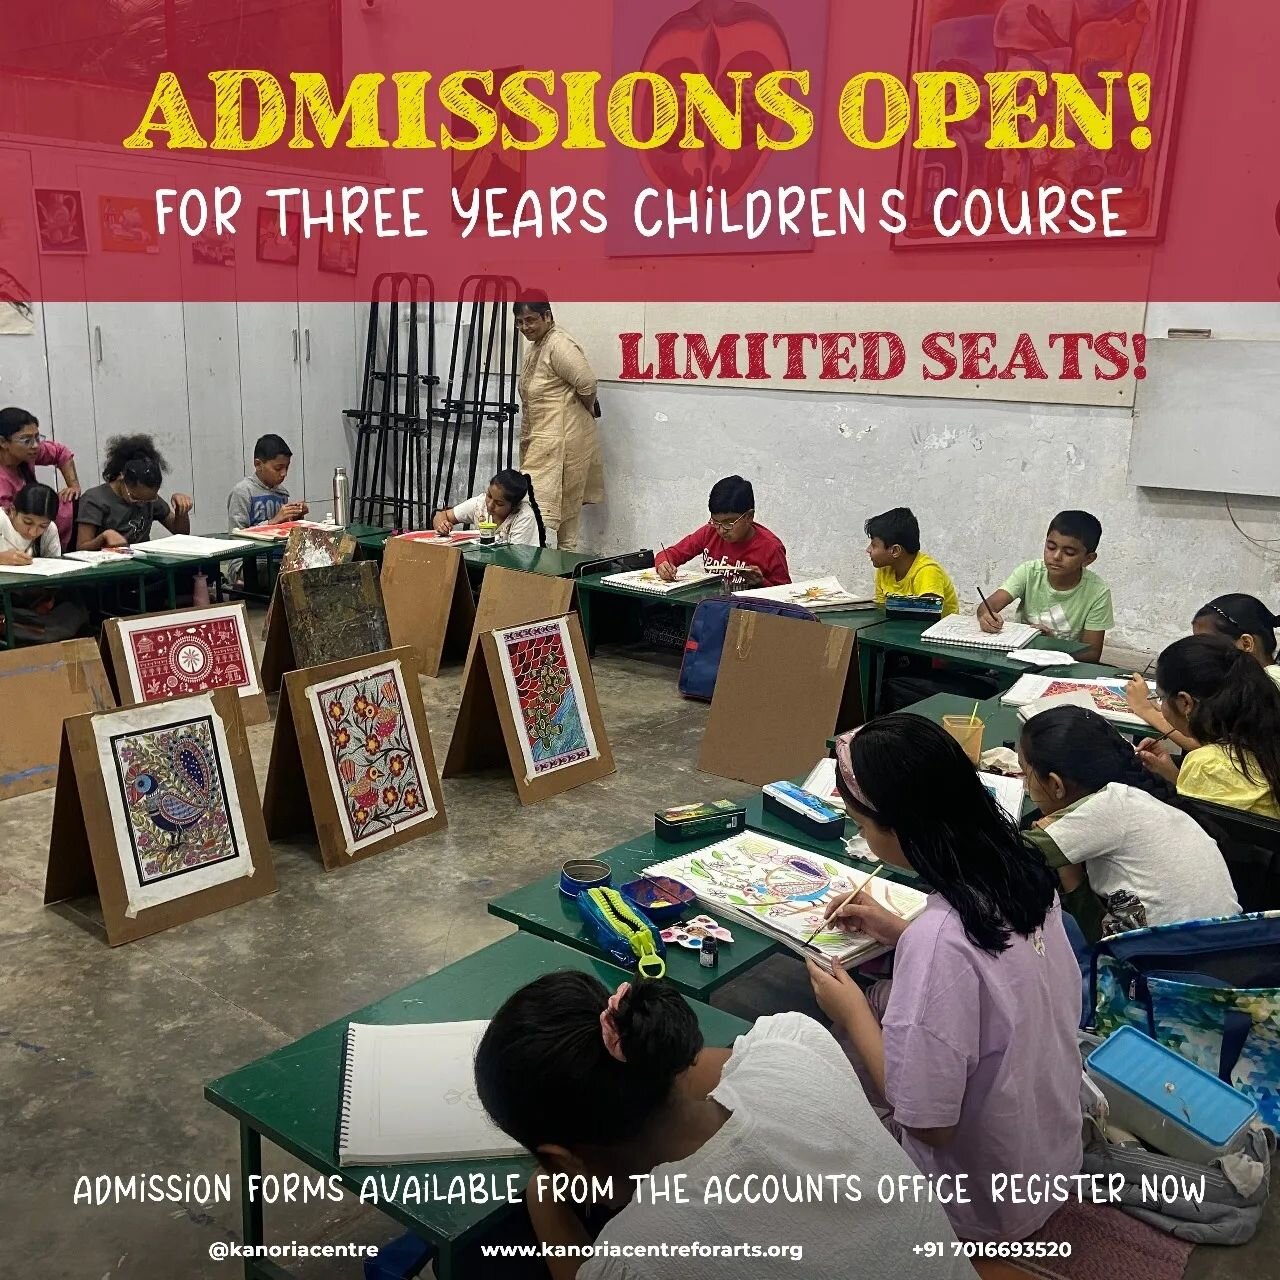 🟥LAST CHANCE TO REGISTER your kids for the Three Years Children's Course!🟥

Visit our website for more details (link in bio)

#childrenclass
#artshows #artclasses #craftclass #artandcrafts #paintingclass #sculptureclass #kanoriacenterforarts